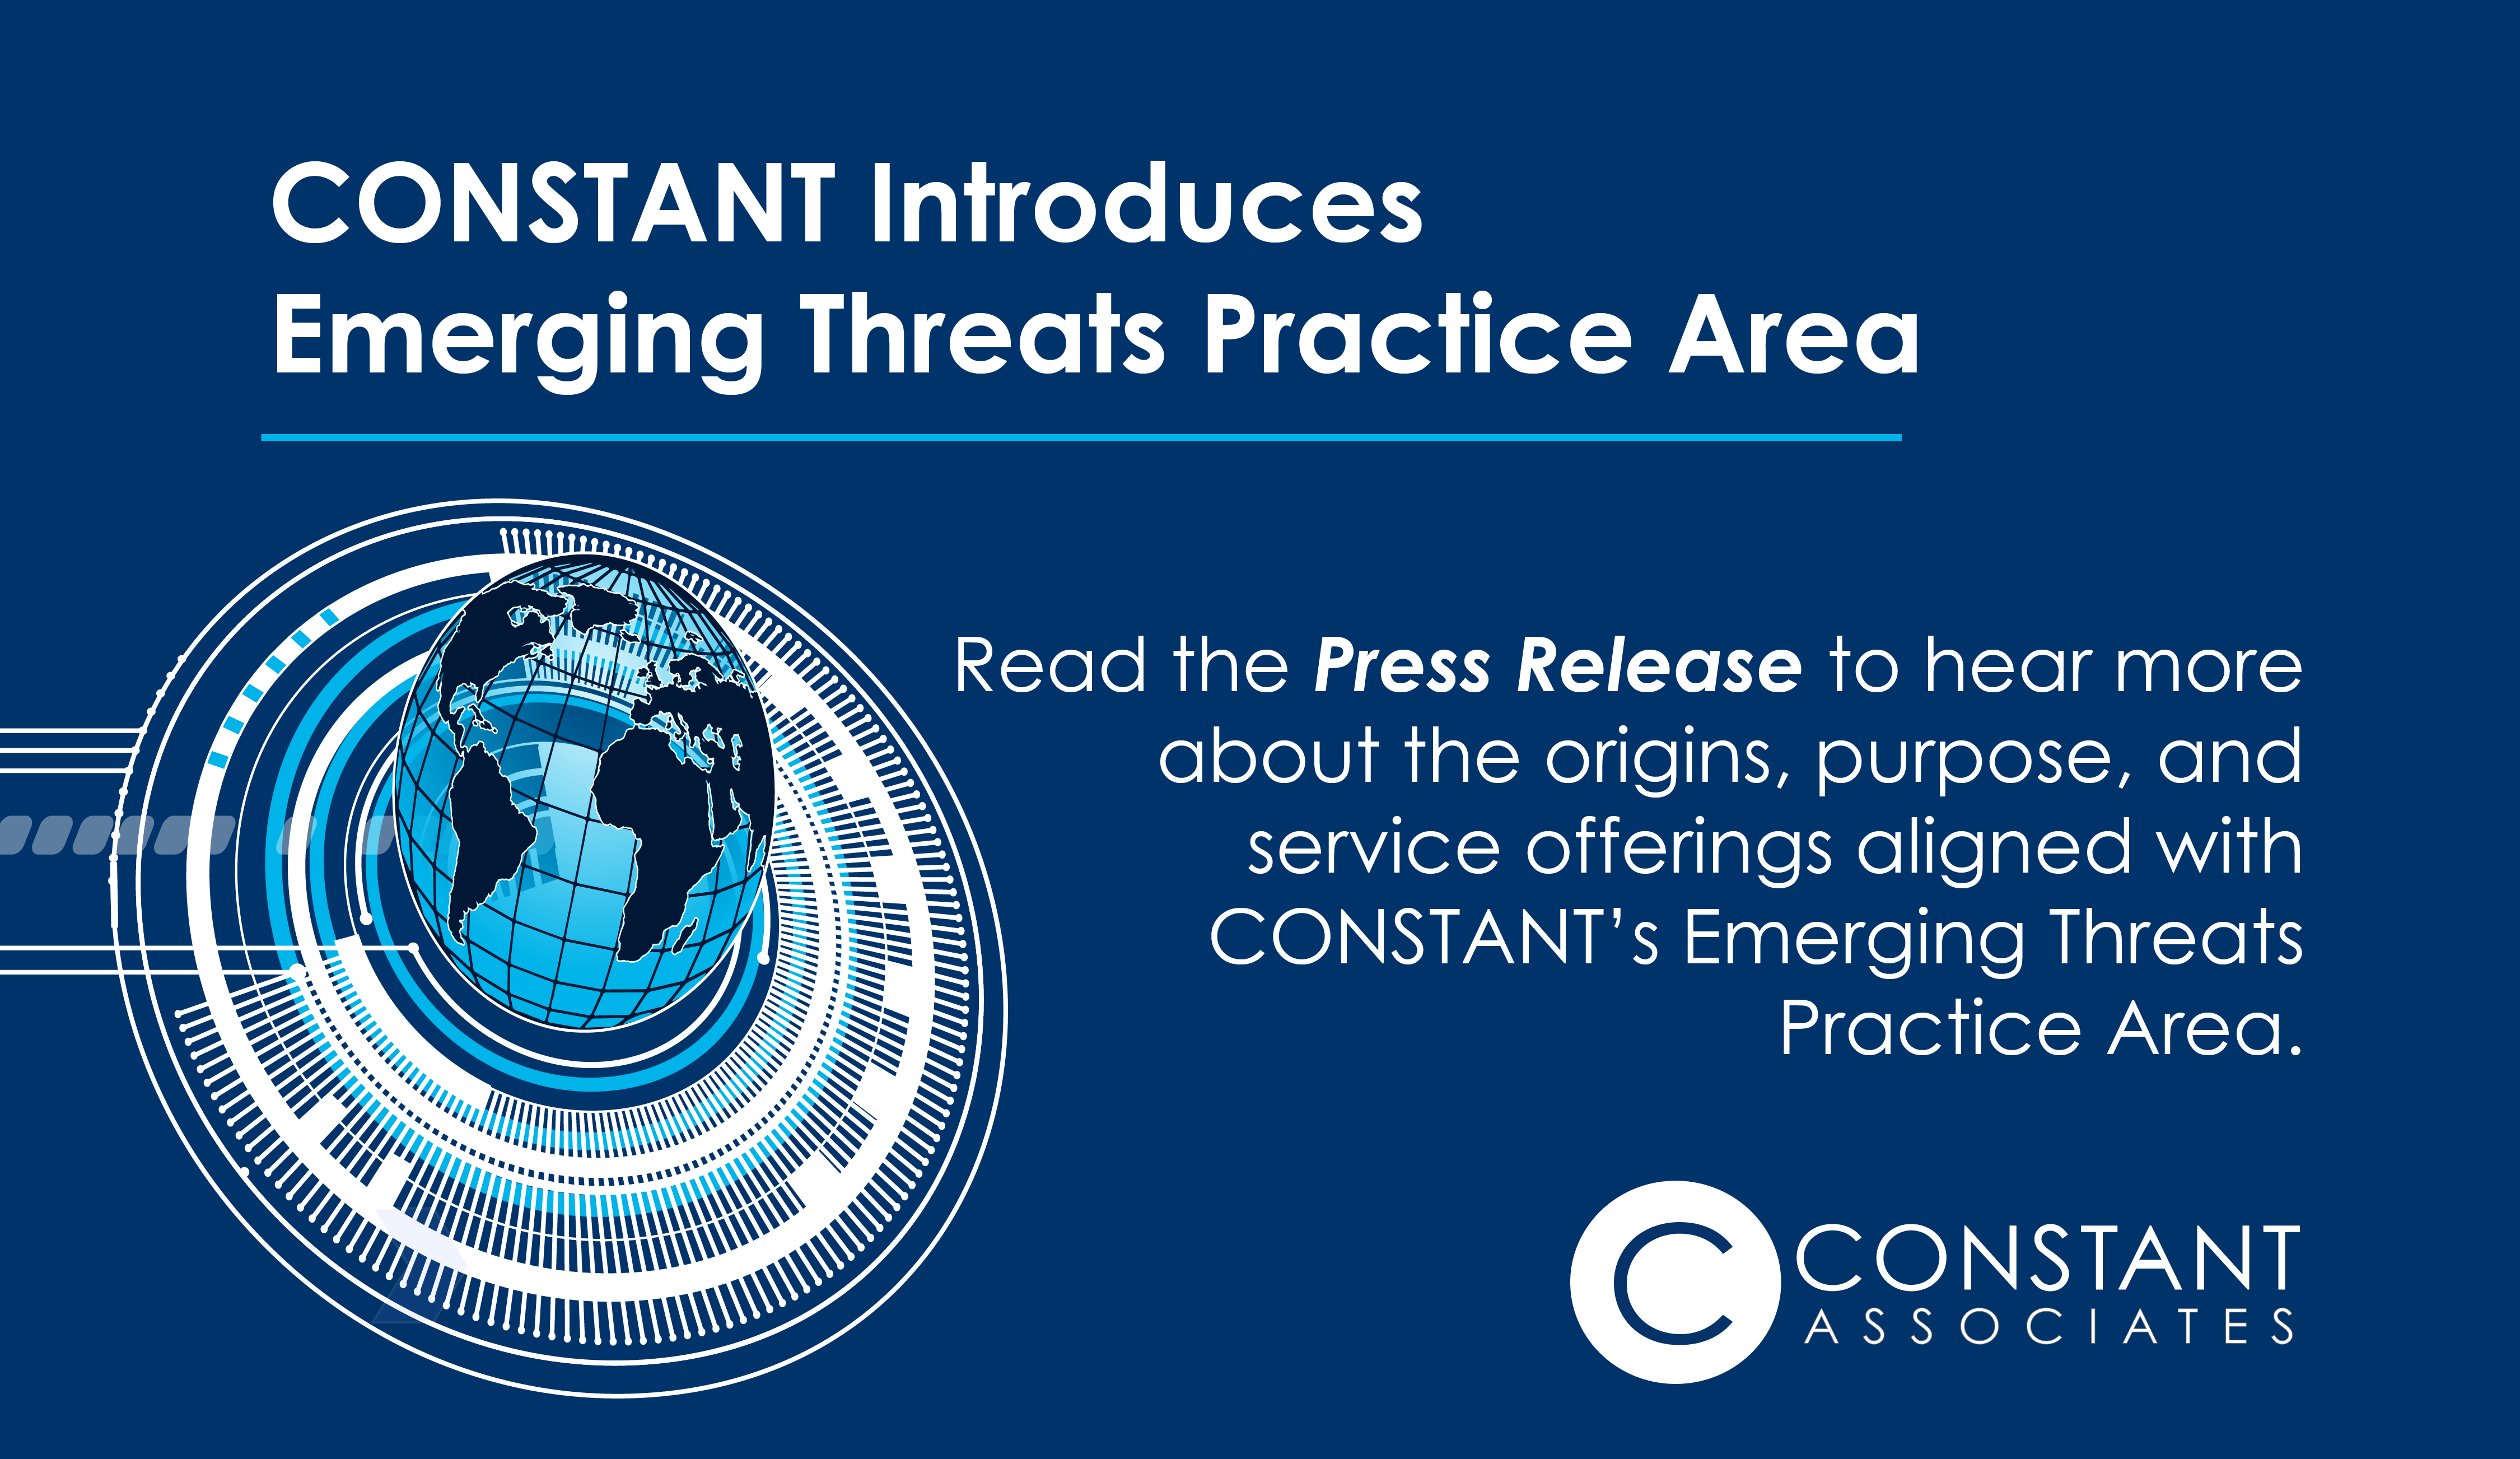 CONSTANT introduces Emerging Threats practice area. Read the Press Release to hear more about the origins, purpose, and service offerings aligned with CONSTANT’s Emerging Threats Practice Area.